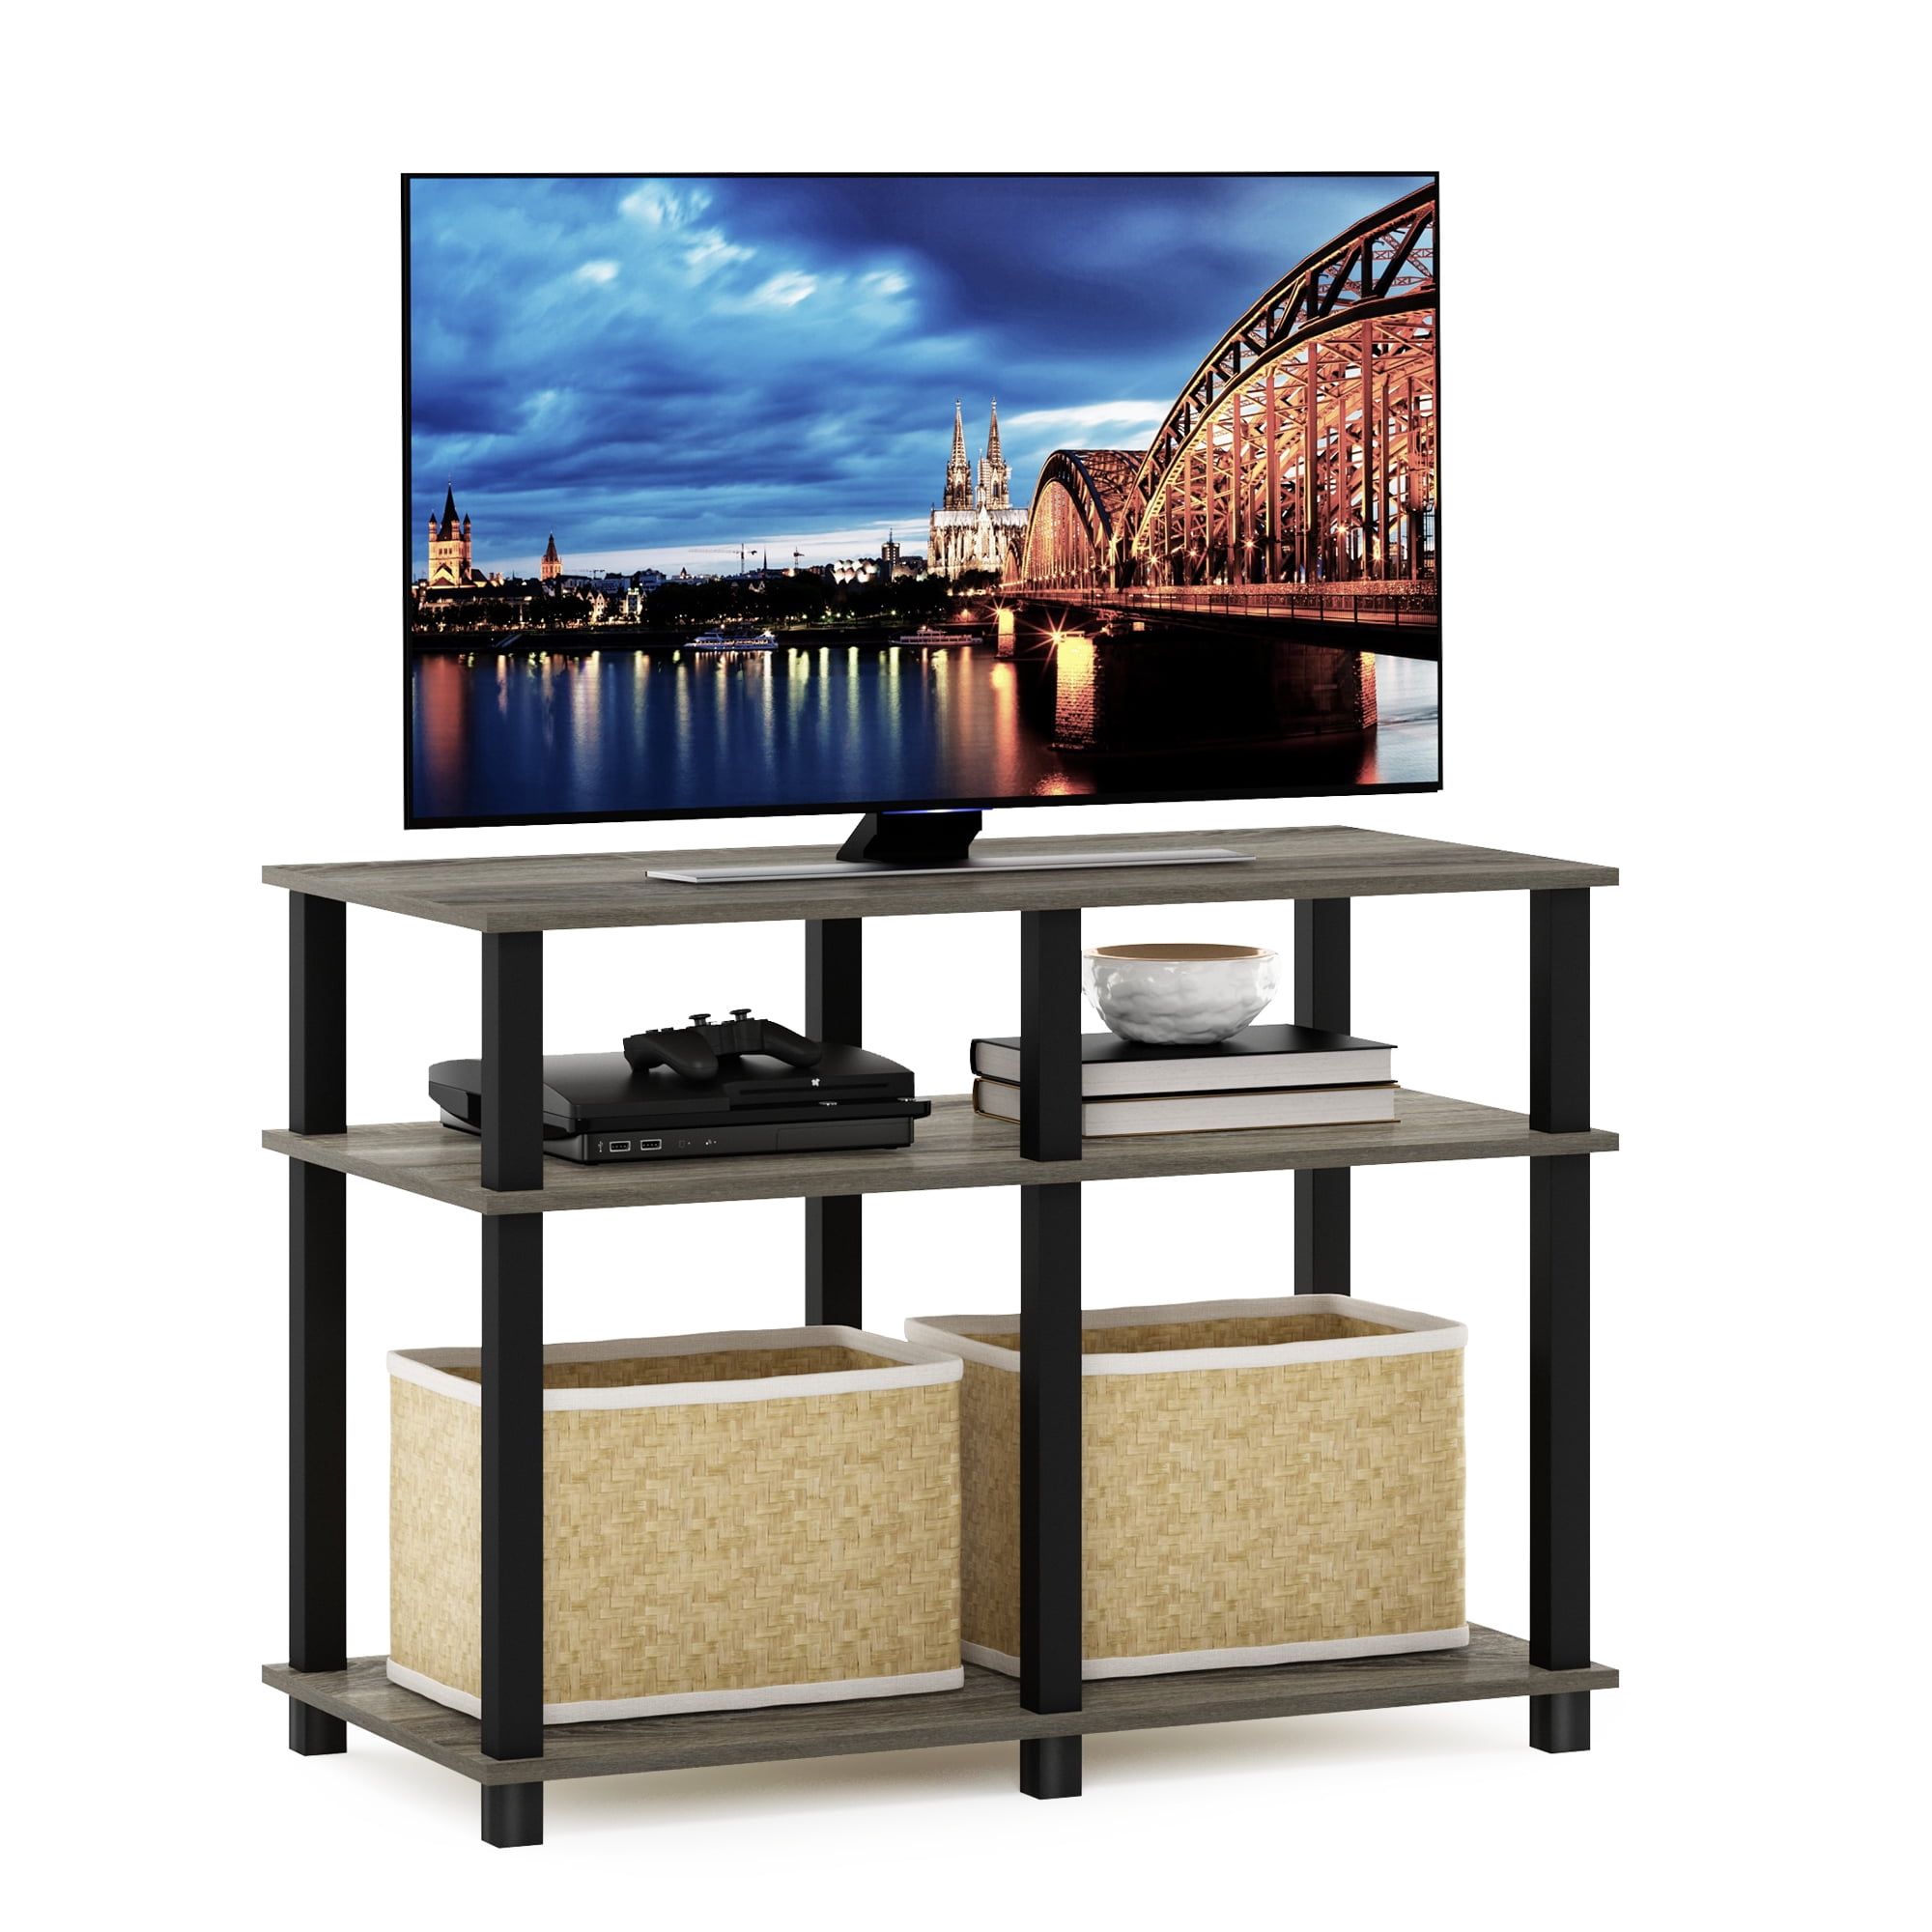 Furinno Romain Turn N Tube Tv Stand For Tv Up To 40 Inch, French Oak Inside Romain Stands For Tvs (View 2 of 20)